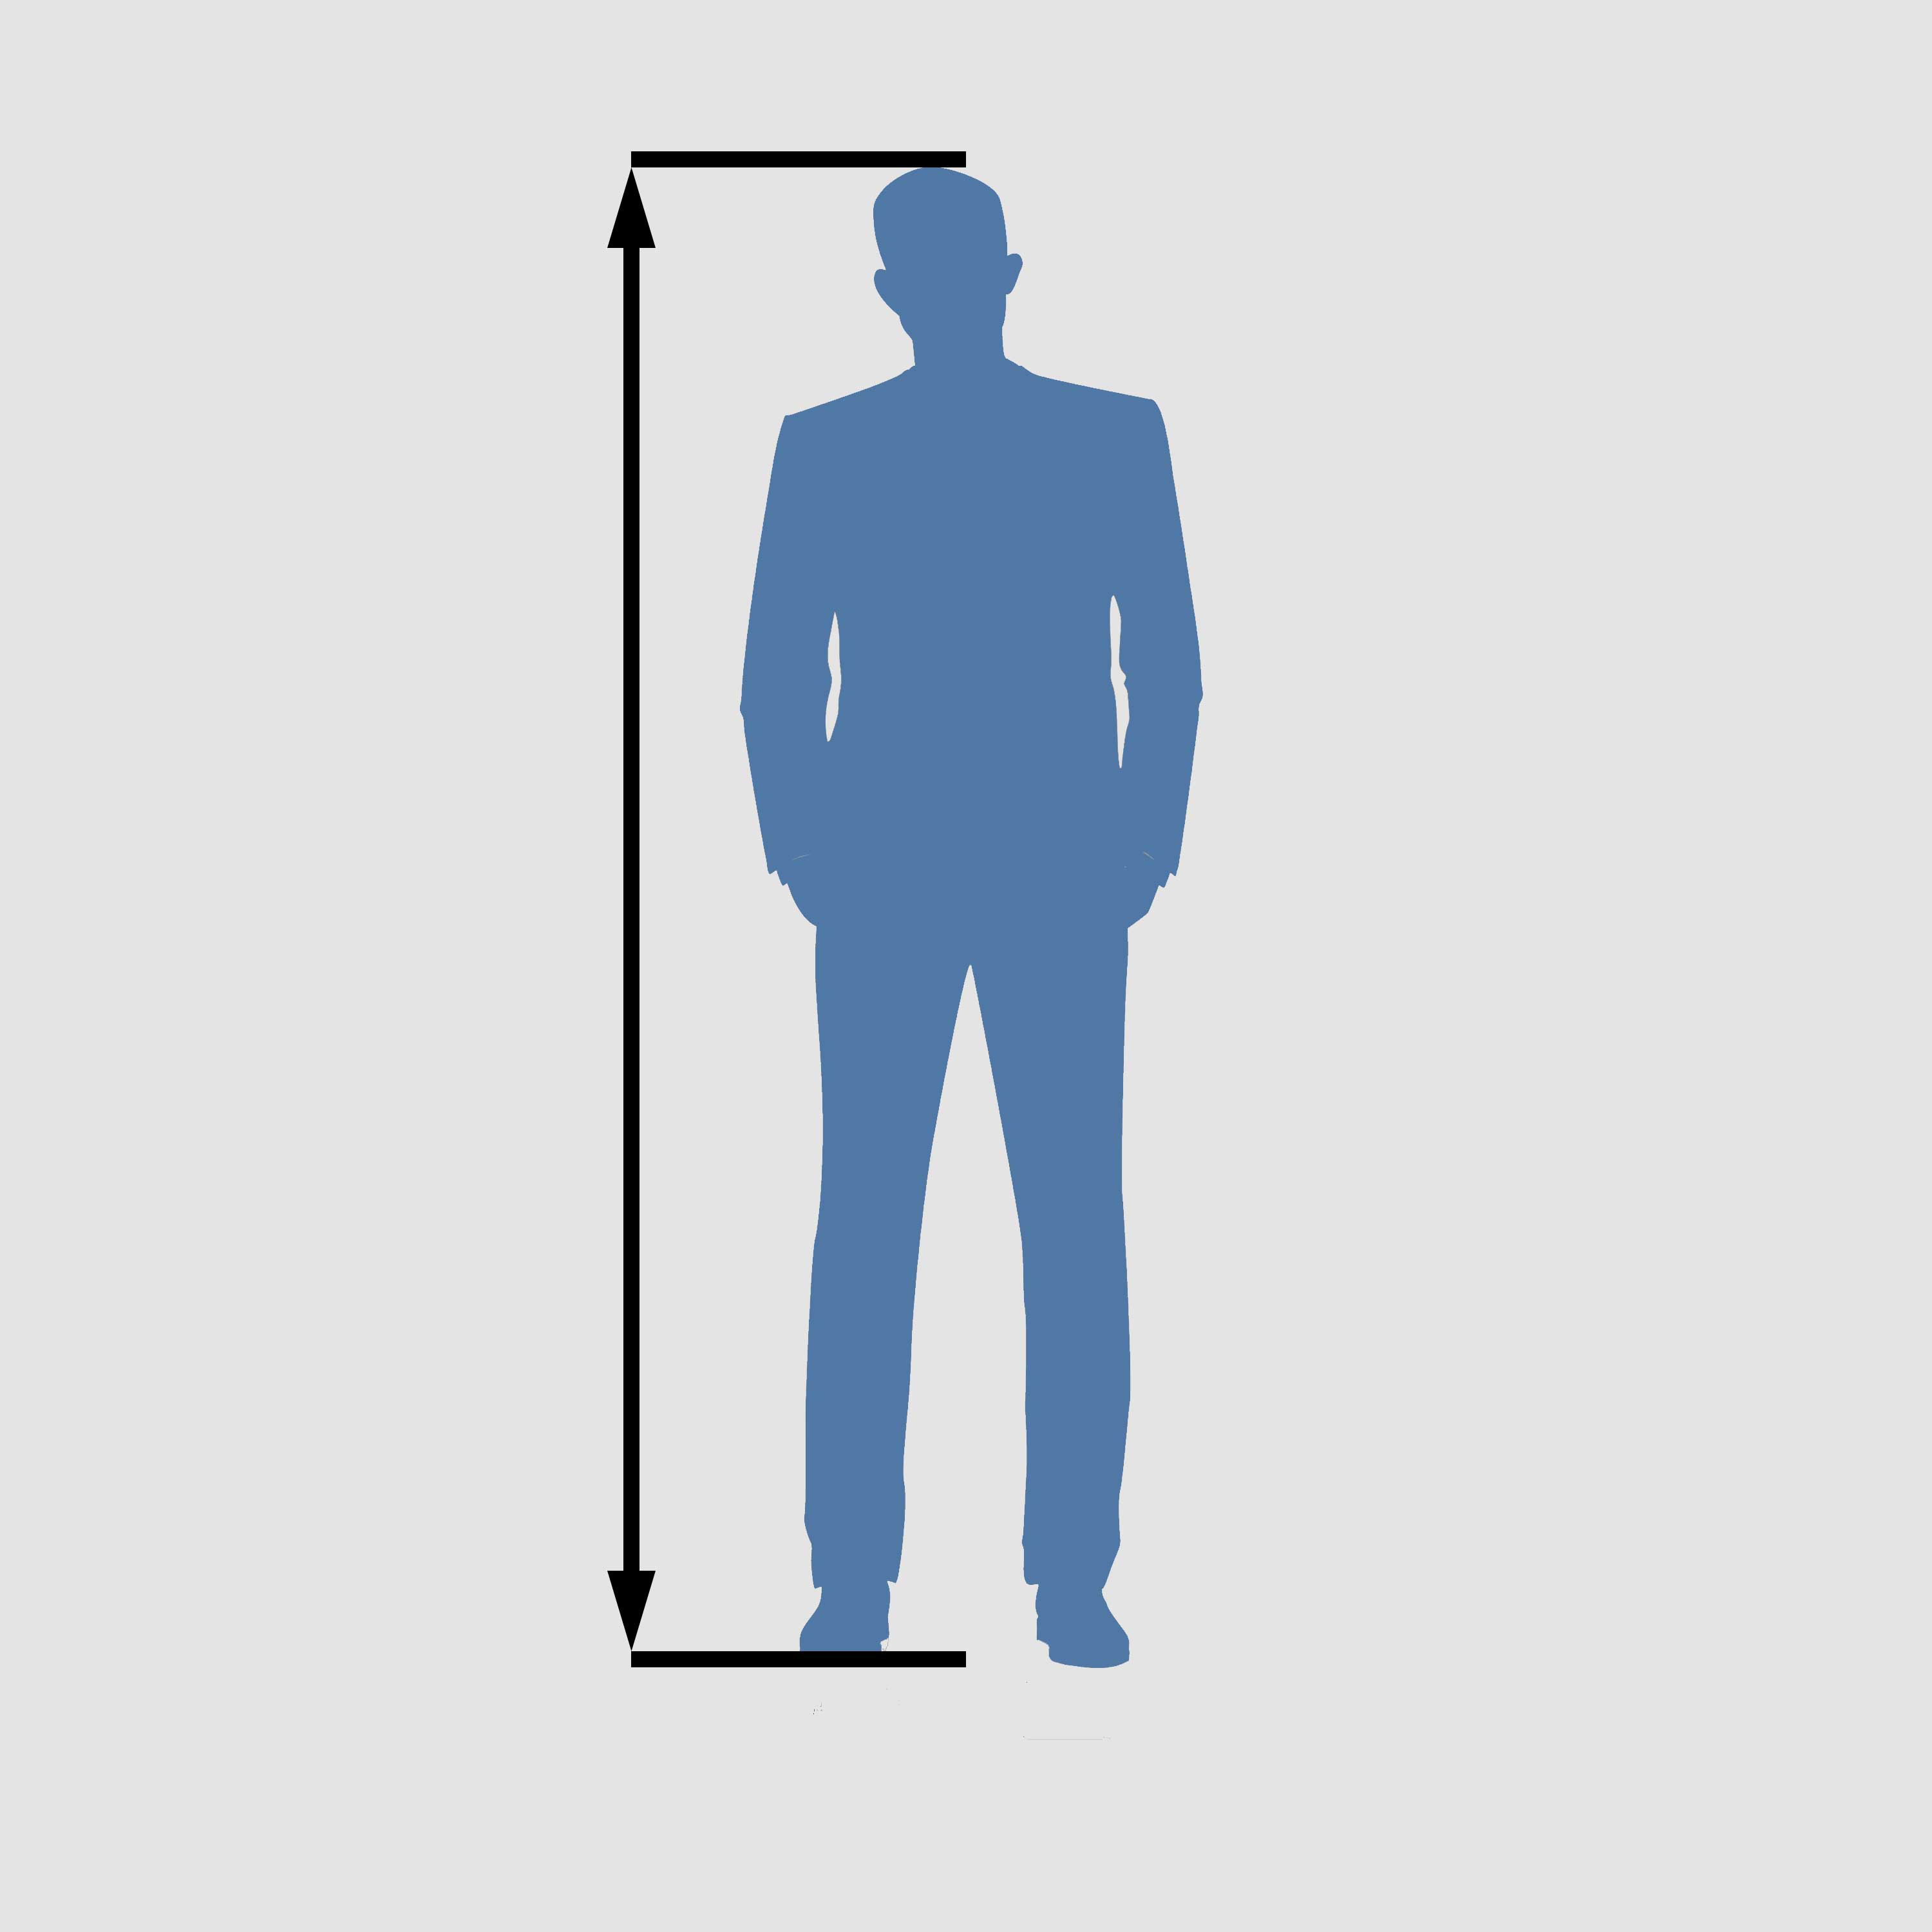 measure your height